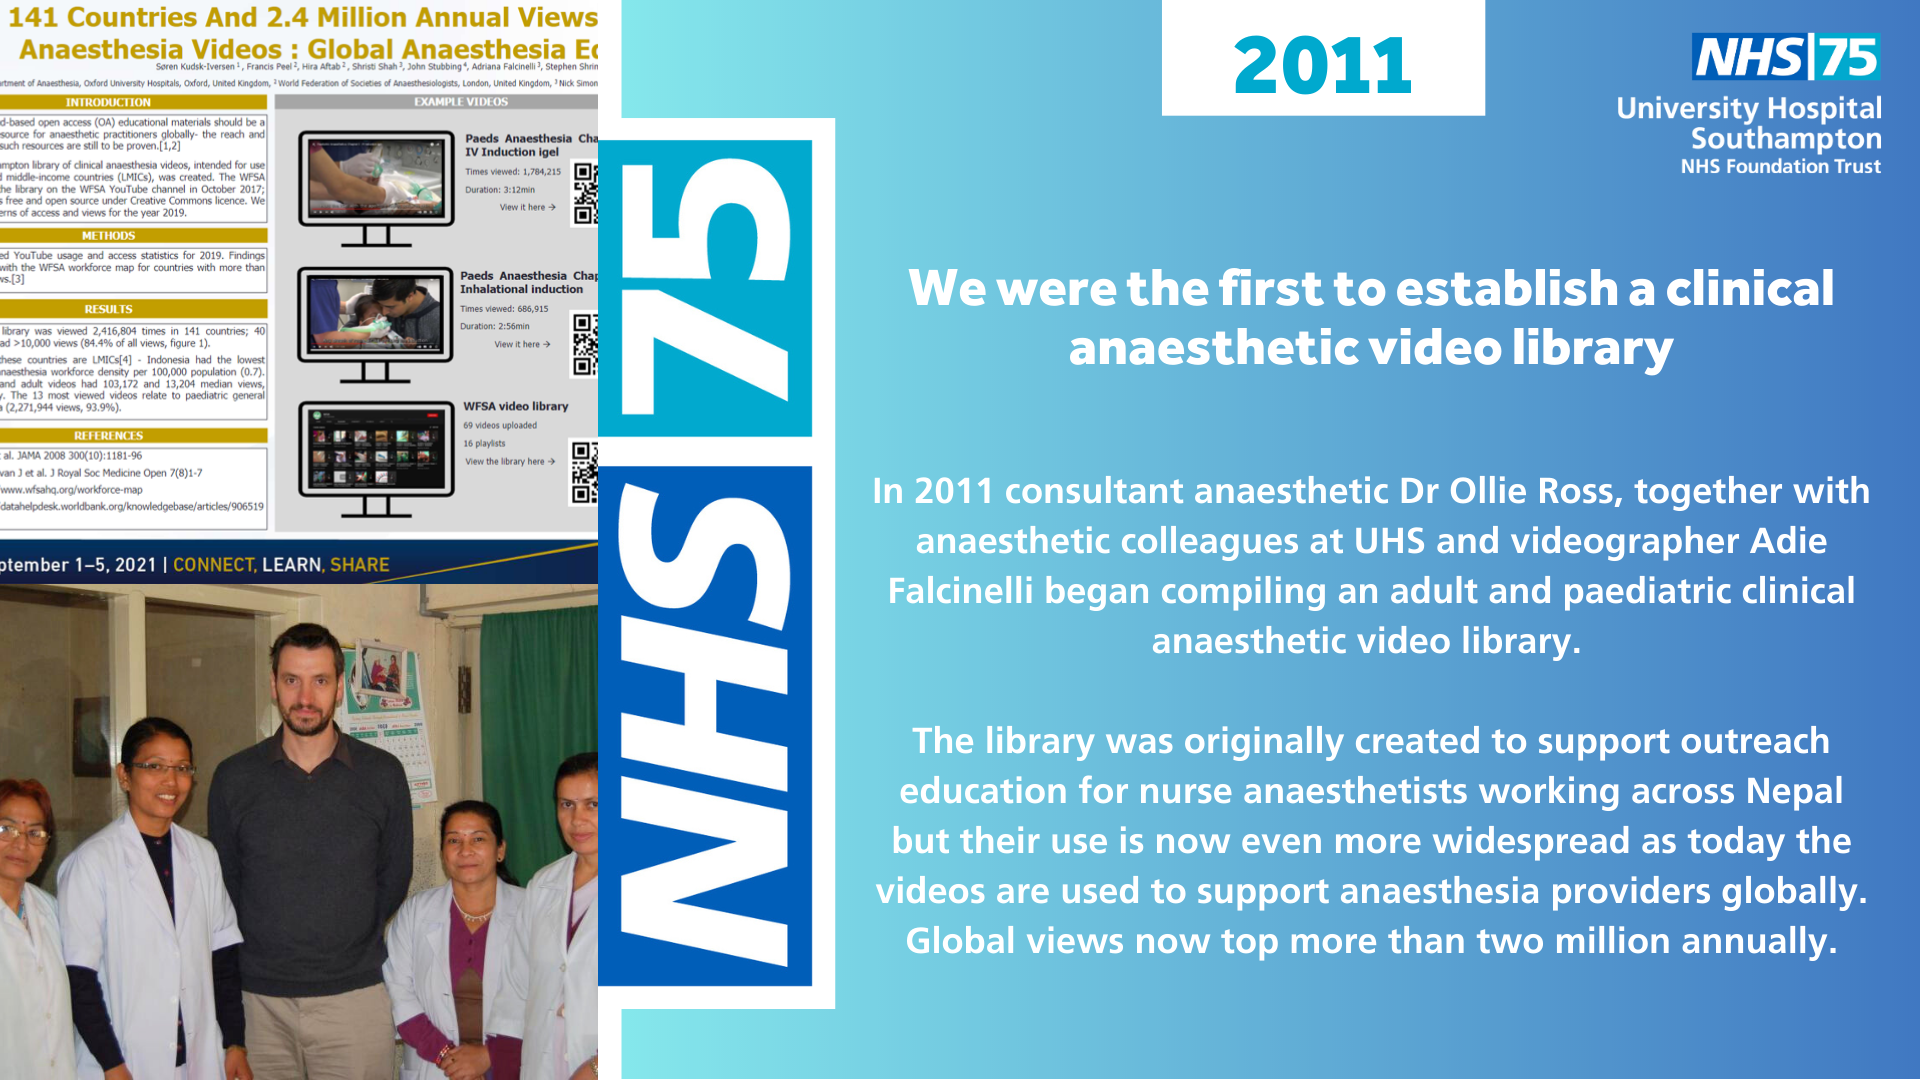 We were the first to establish a clinical anaesthetic video library